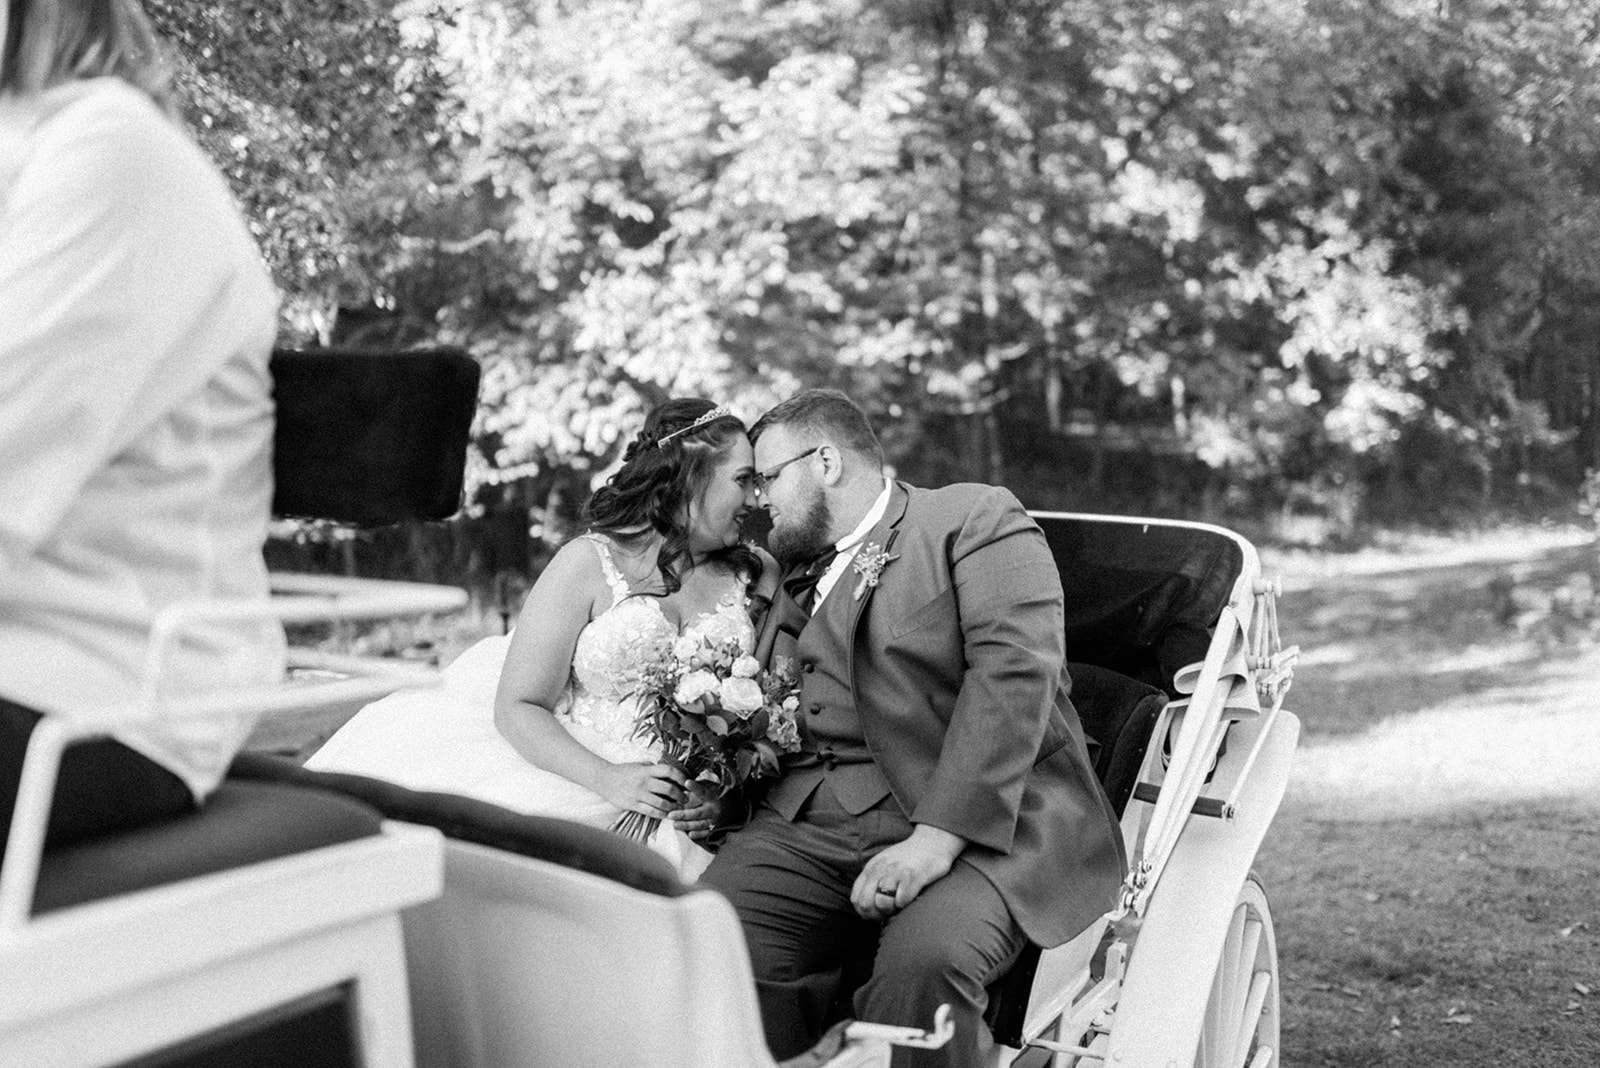 Pennsylvania wedding photographer captures black and white portrait of bride and groom on horse-drawn carriage